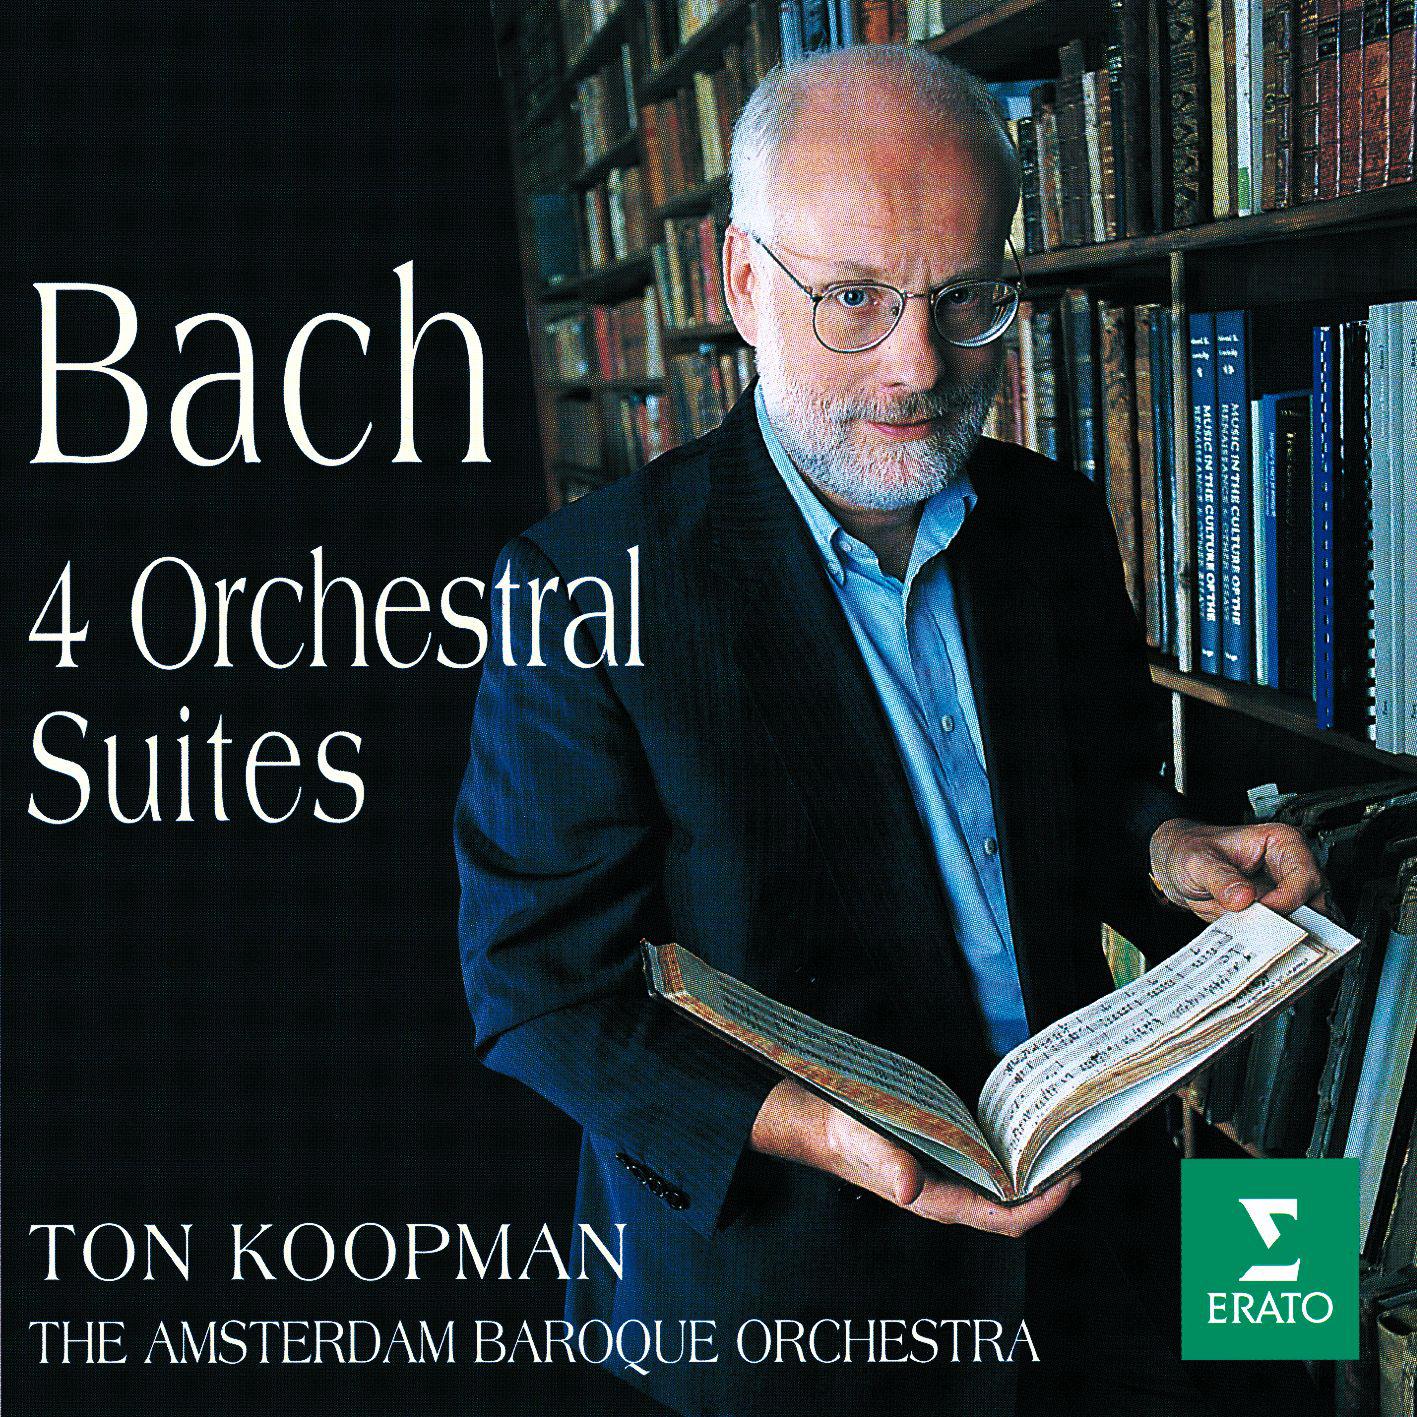 Orchestral Suite No.3 in D major BWV1068 : I Ouverture